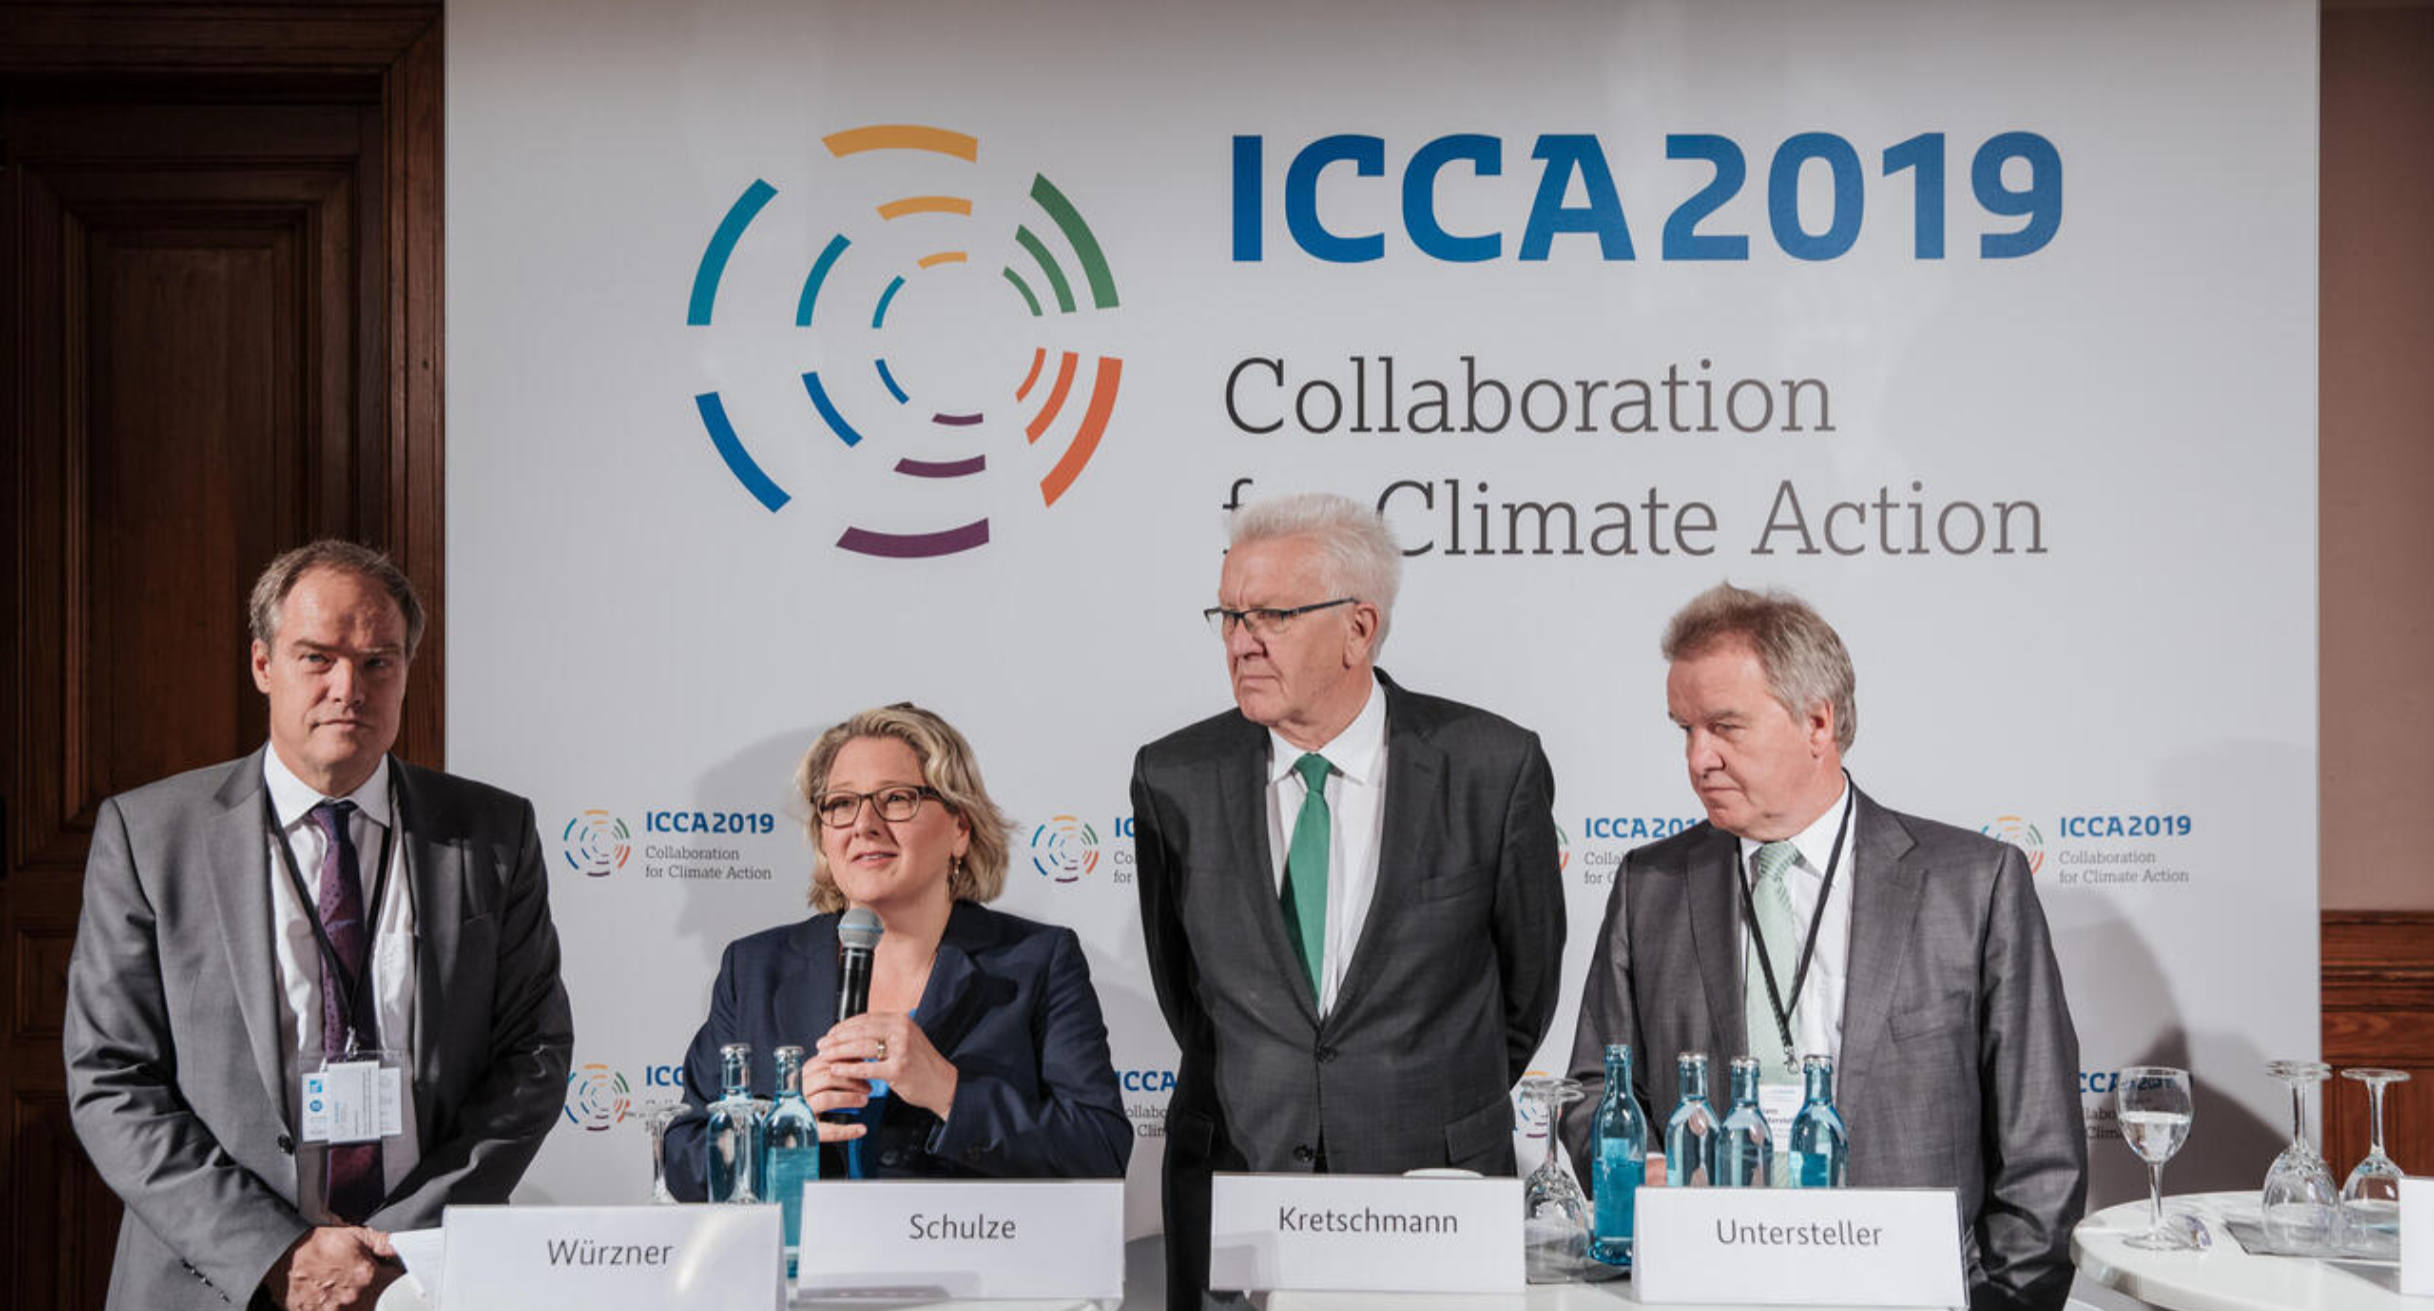  Baden-Württemberg is organizing the international climate conference ICCA 2019 together with the Federal Environment Ministry and the city of Heidelberg. At the press conference (from left): Eckart Würzner, Mayor of Heidelberg, Federal Environment Minister Svenja Schulze, Minister President Winfried Kretschmann and Environment Minister Franz Untersteller.']